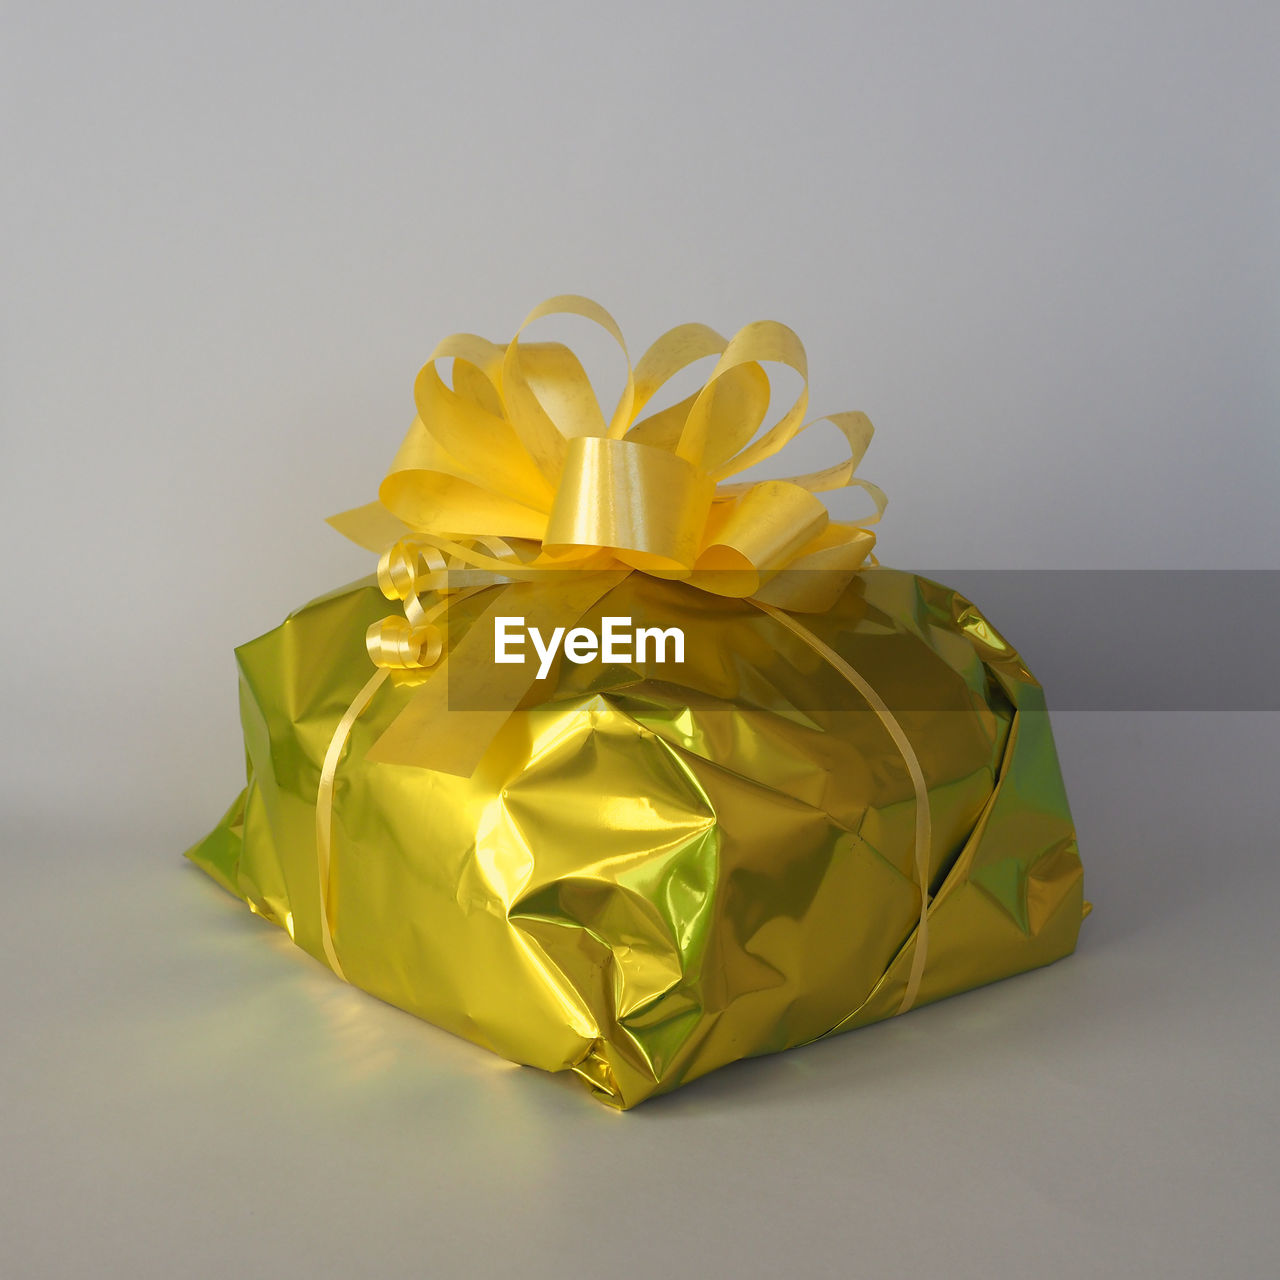 yellow, studio shot, gift, gold, art, paper, indoors, gray background, celebration, petal, ribbon, single object, flower, no people, surprise, origami paper, wrapping paper, gray, origami, wrapped, bow, wealth, cut out, copy space, shiny, emotion, holiday, tied bow, box, gift box, still life, event, luxury